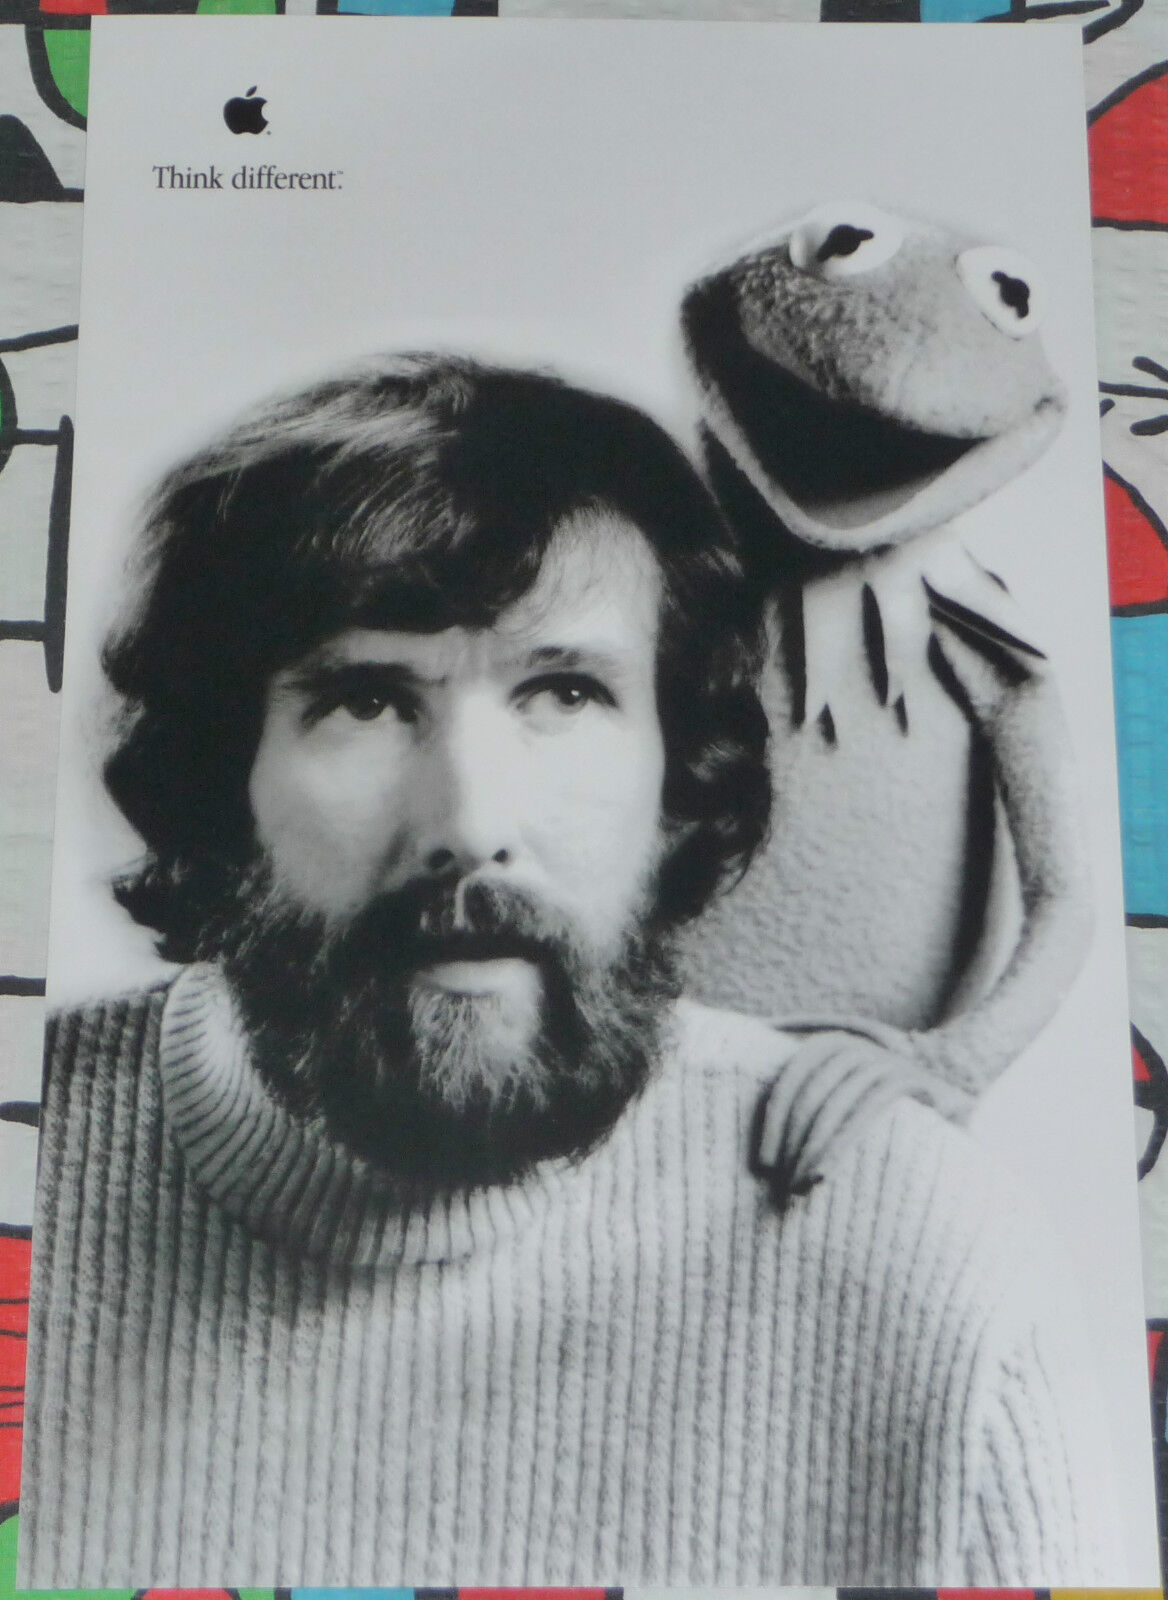 APPLE THINK DIFFERENT ORIGINAL POSTER JIM HENSON AND KERMIT APPROX. 17X11 